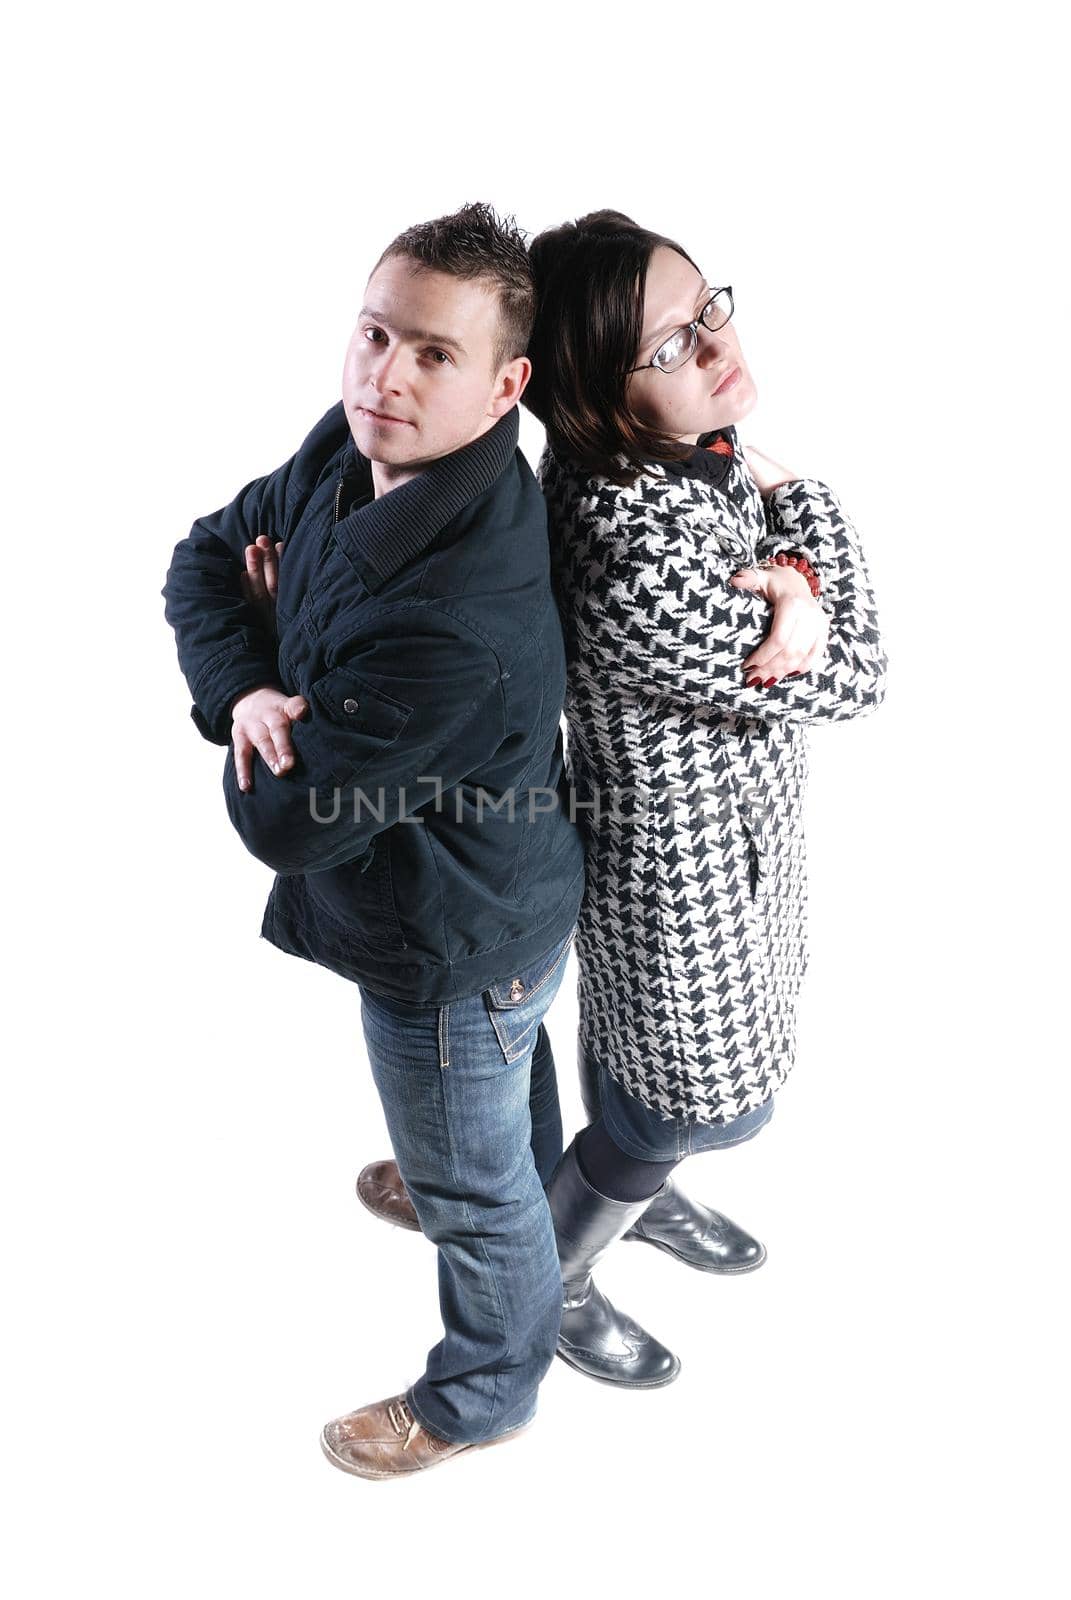 woman and man isolated on white background